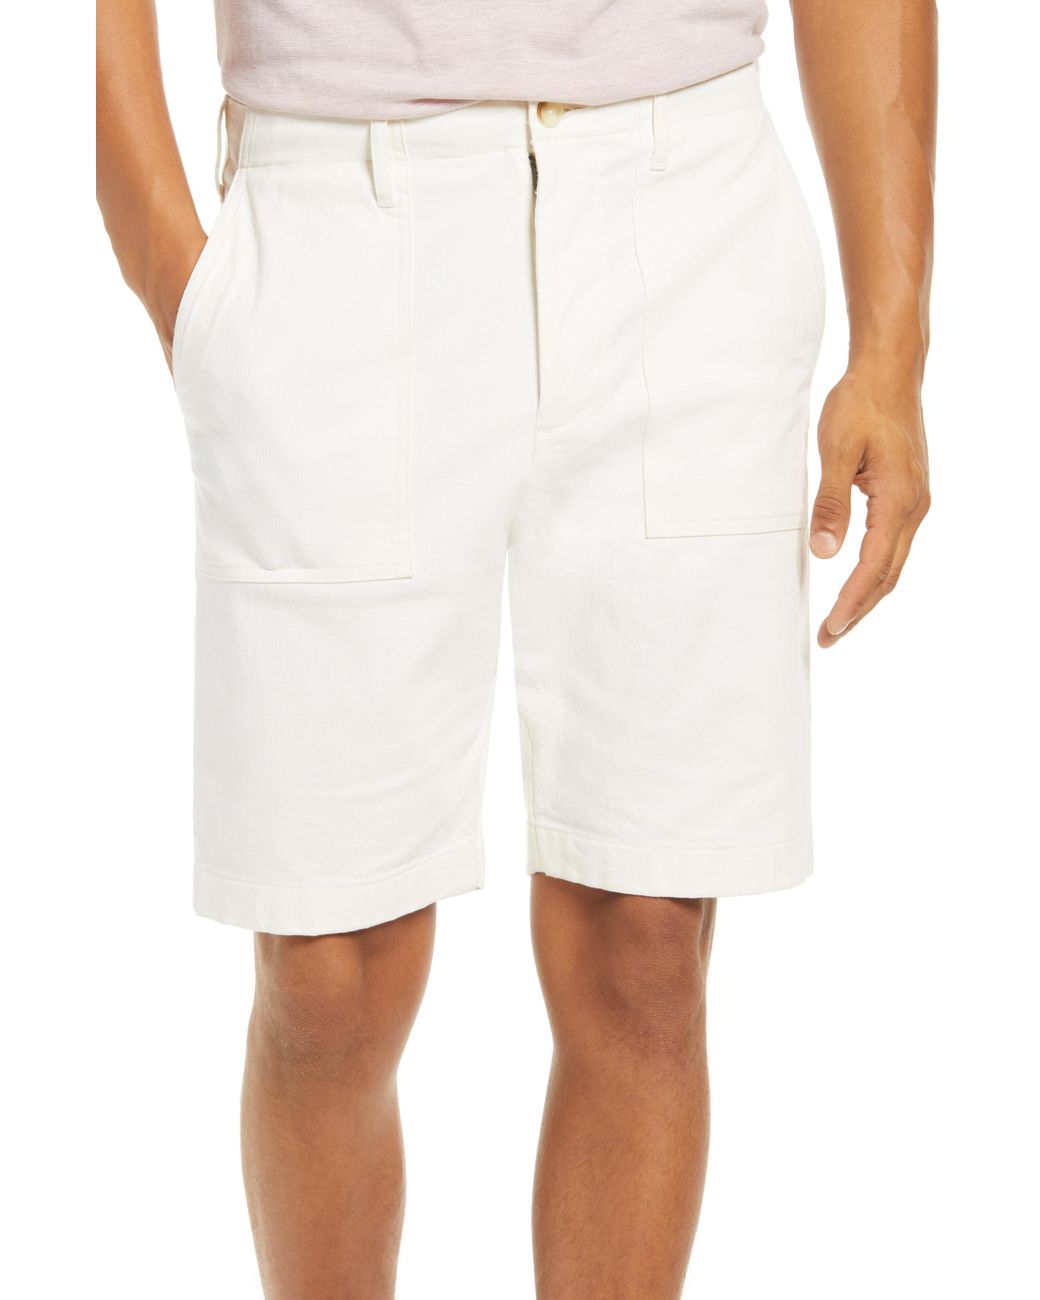 Vince Cotton Slim Fit Utility Shorts in White for Men - Lyst